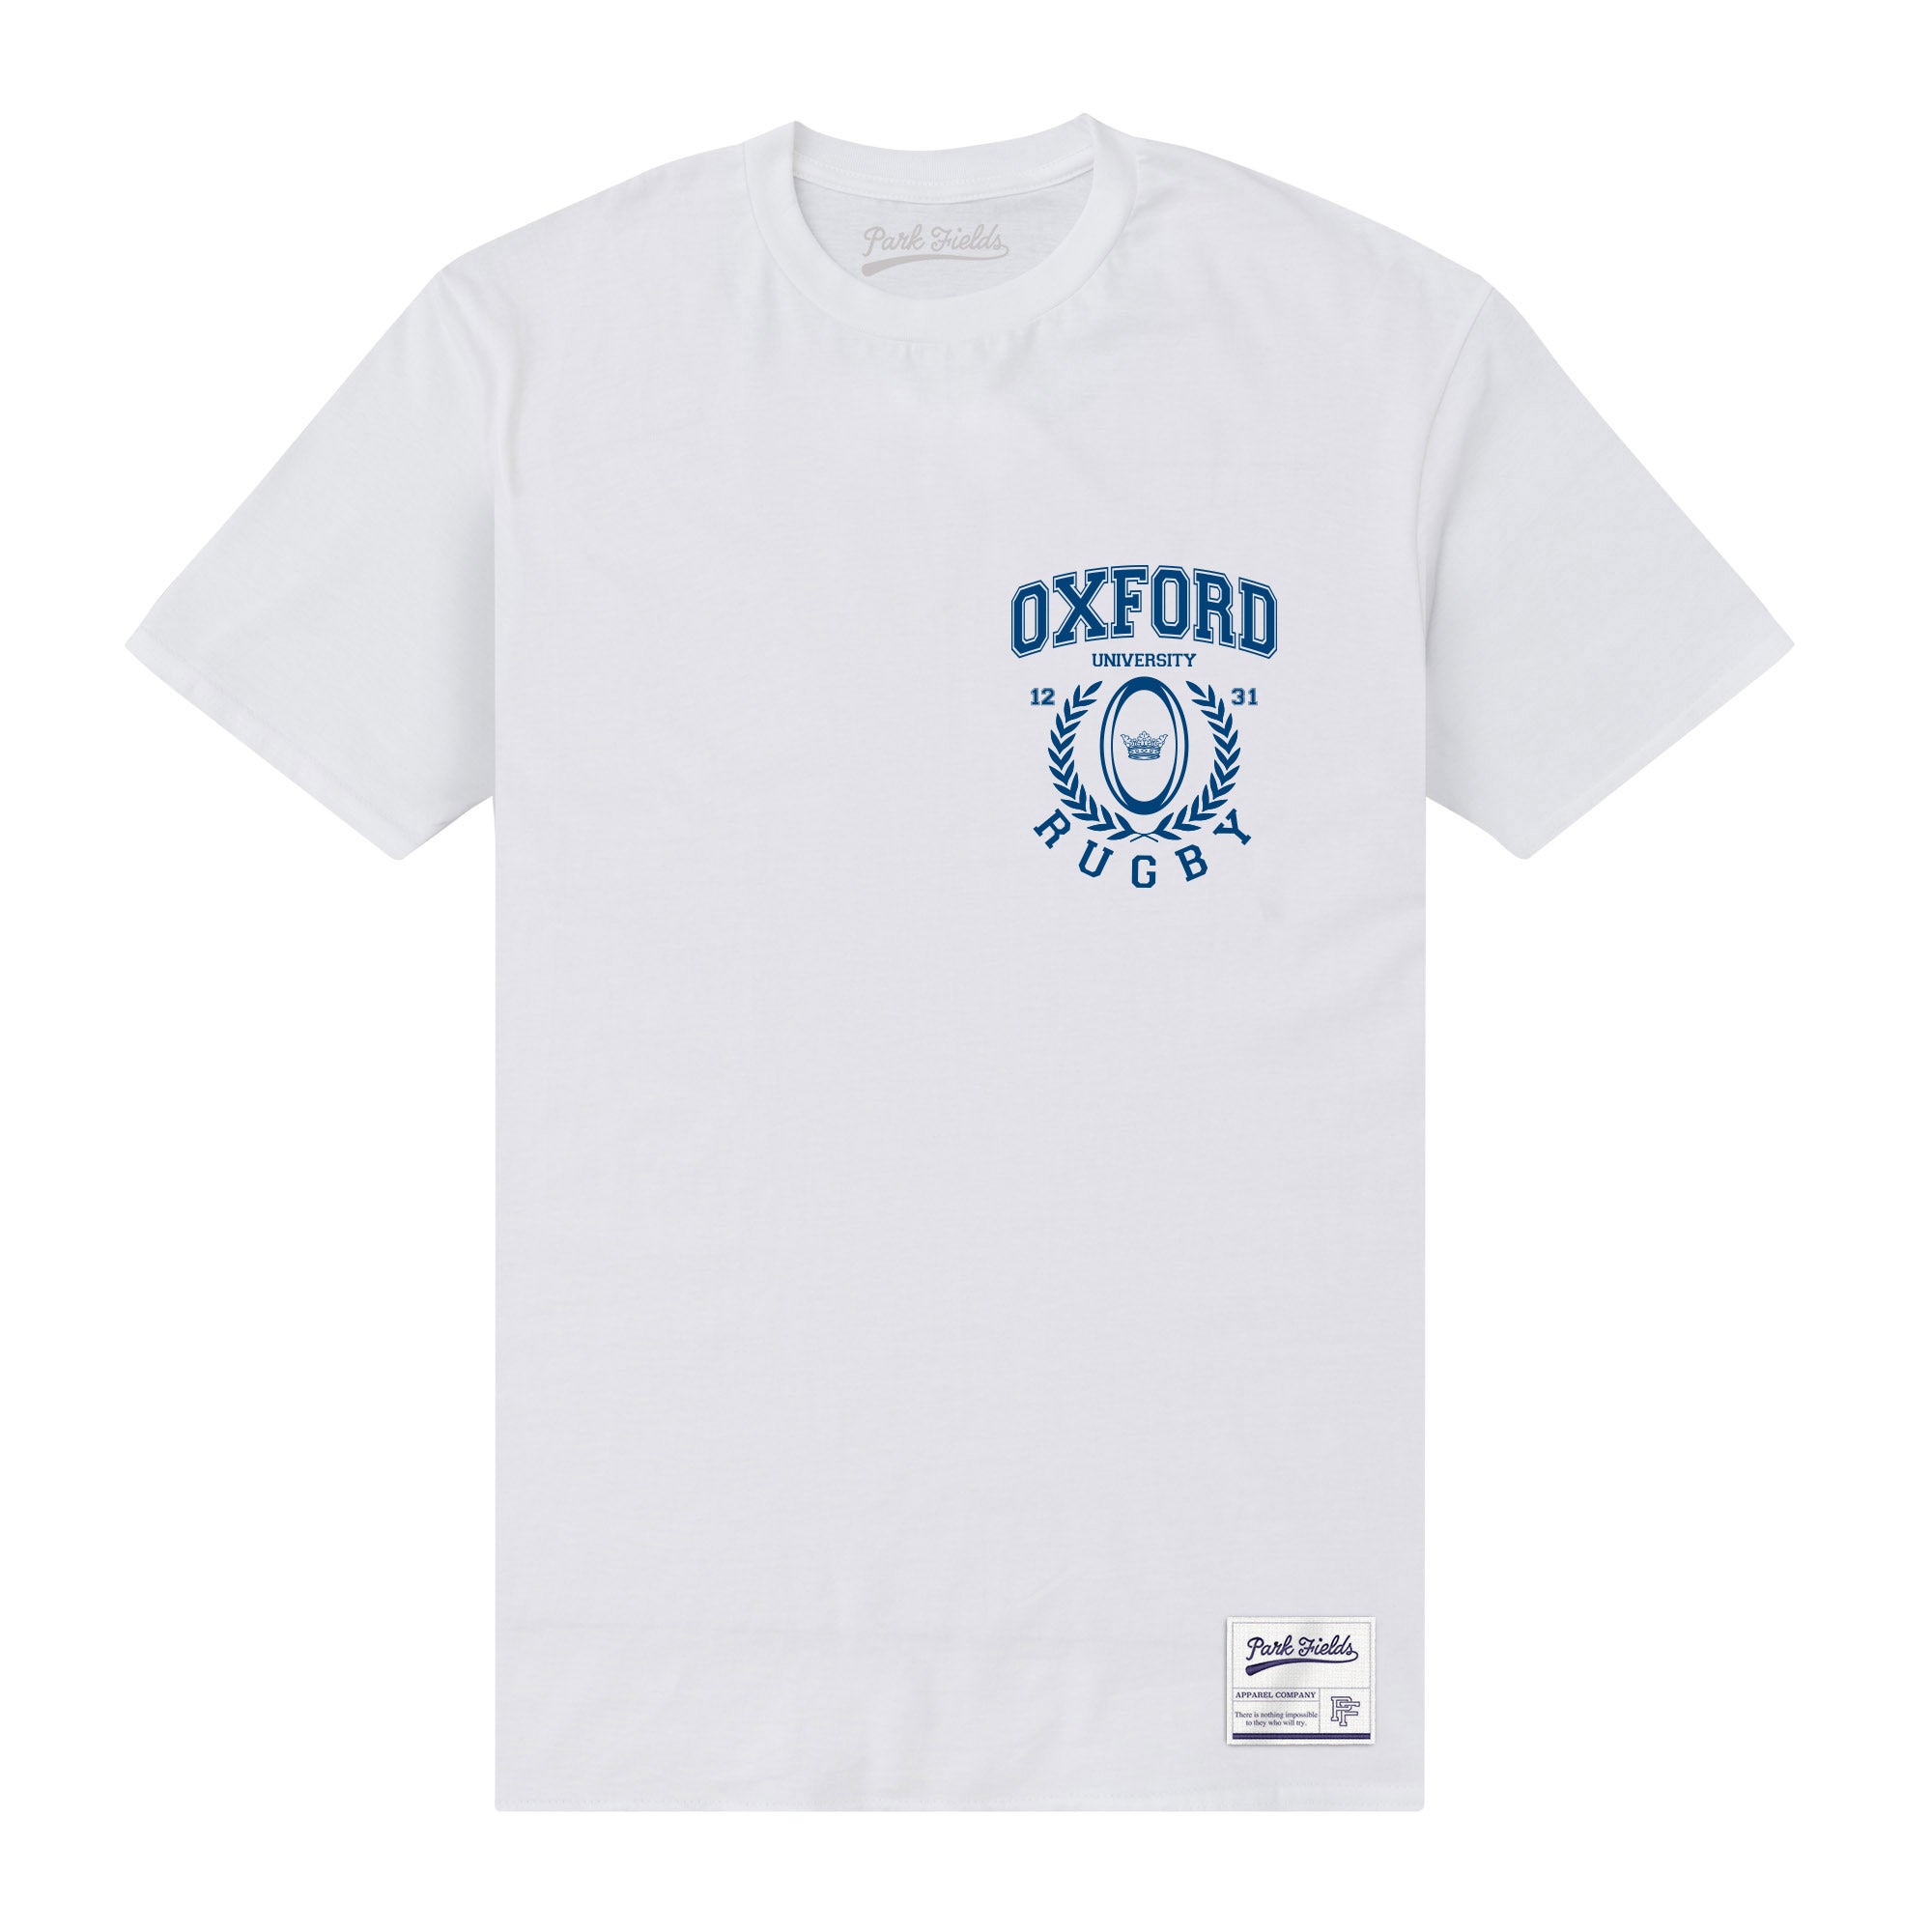 Oxford University Rugby T-Shirt - White